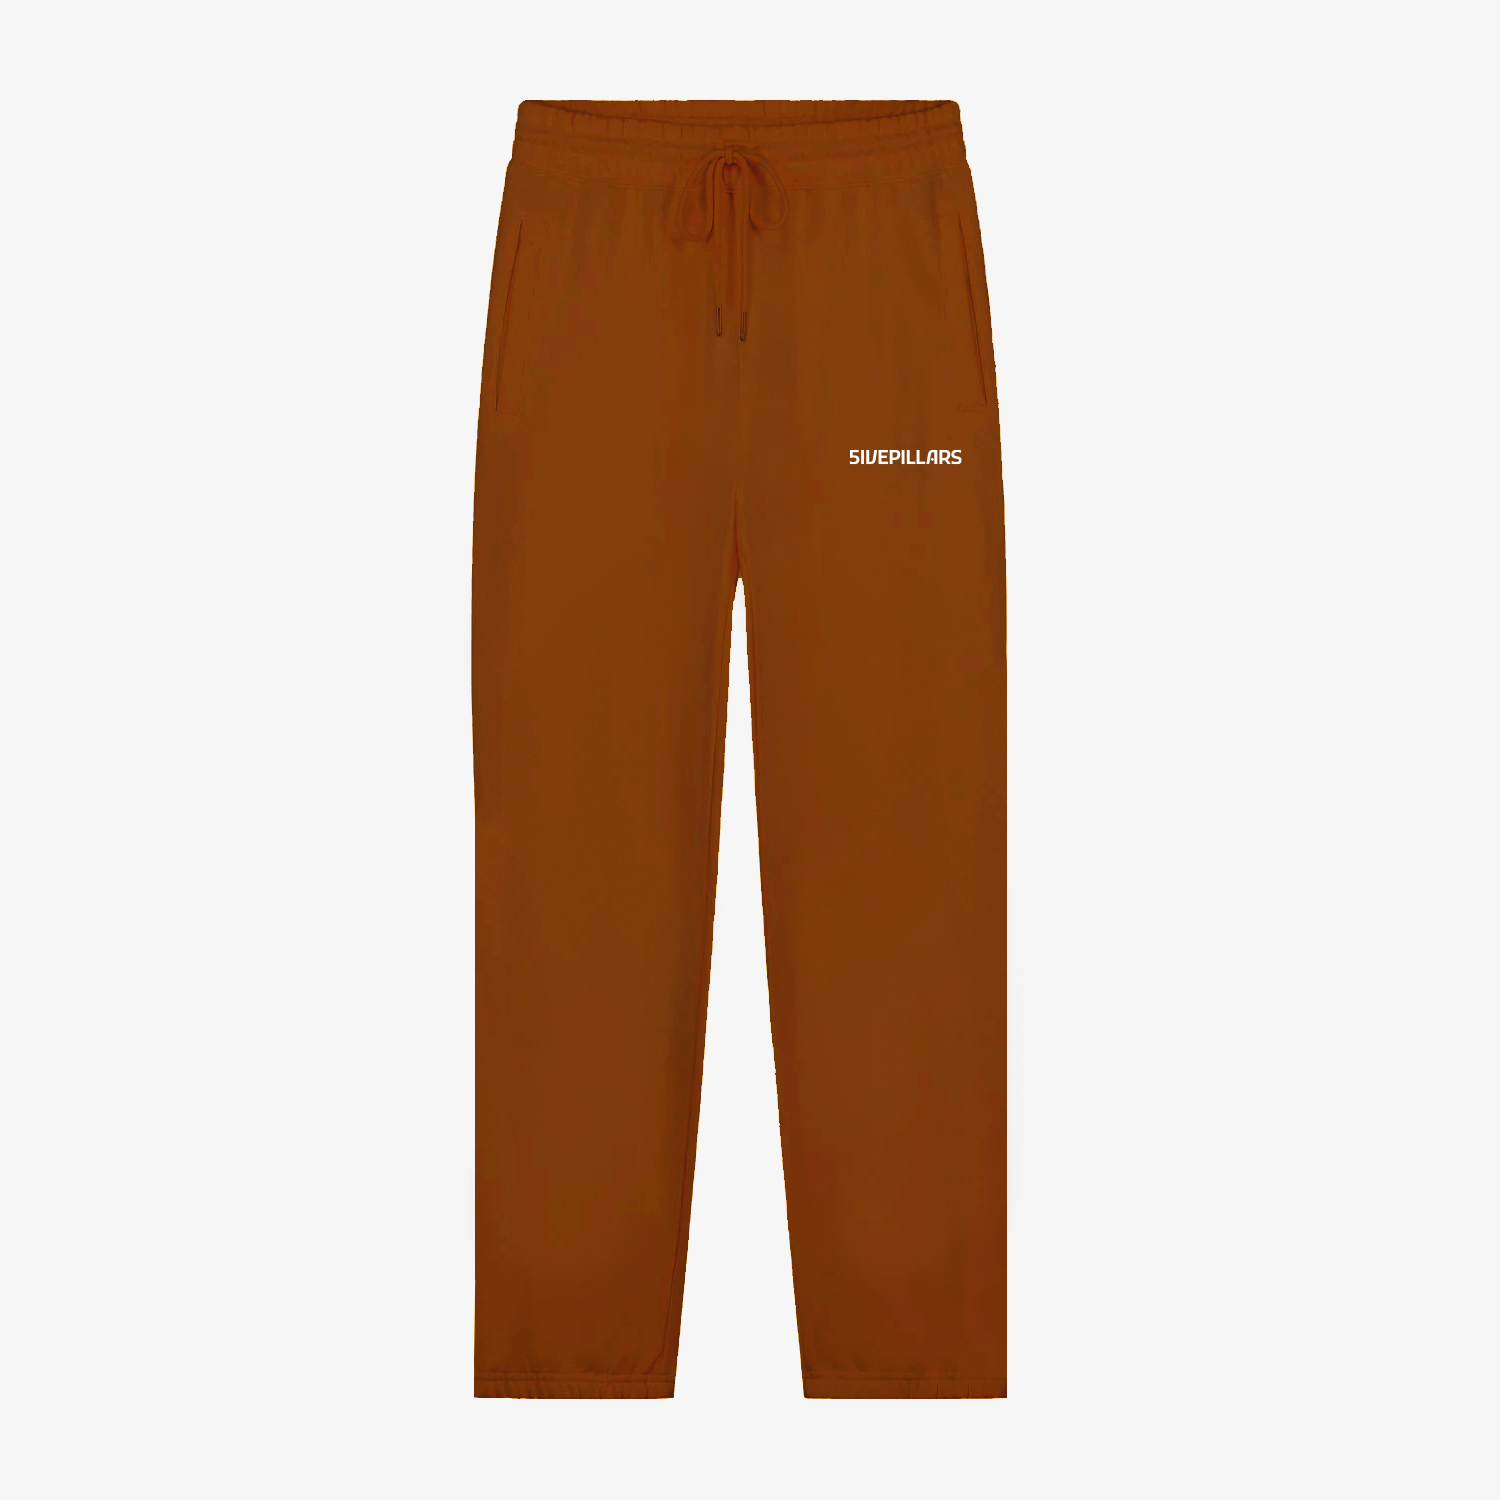 5ivepillars Relaxed Fit Sweatpants - Umber